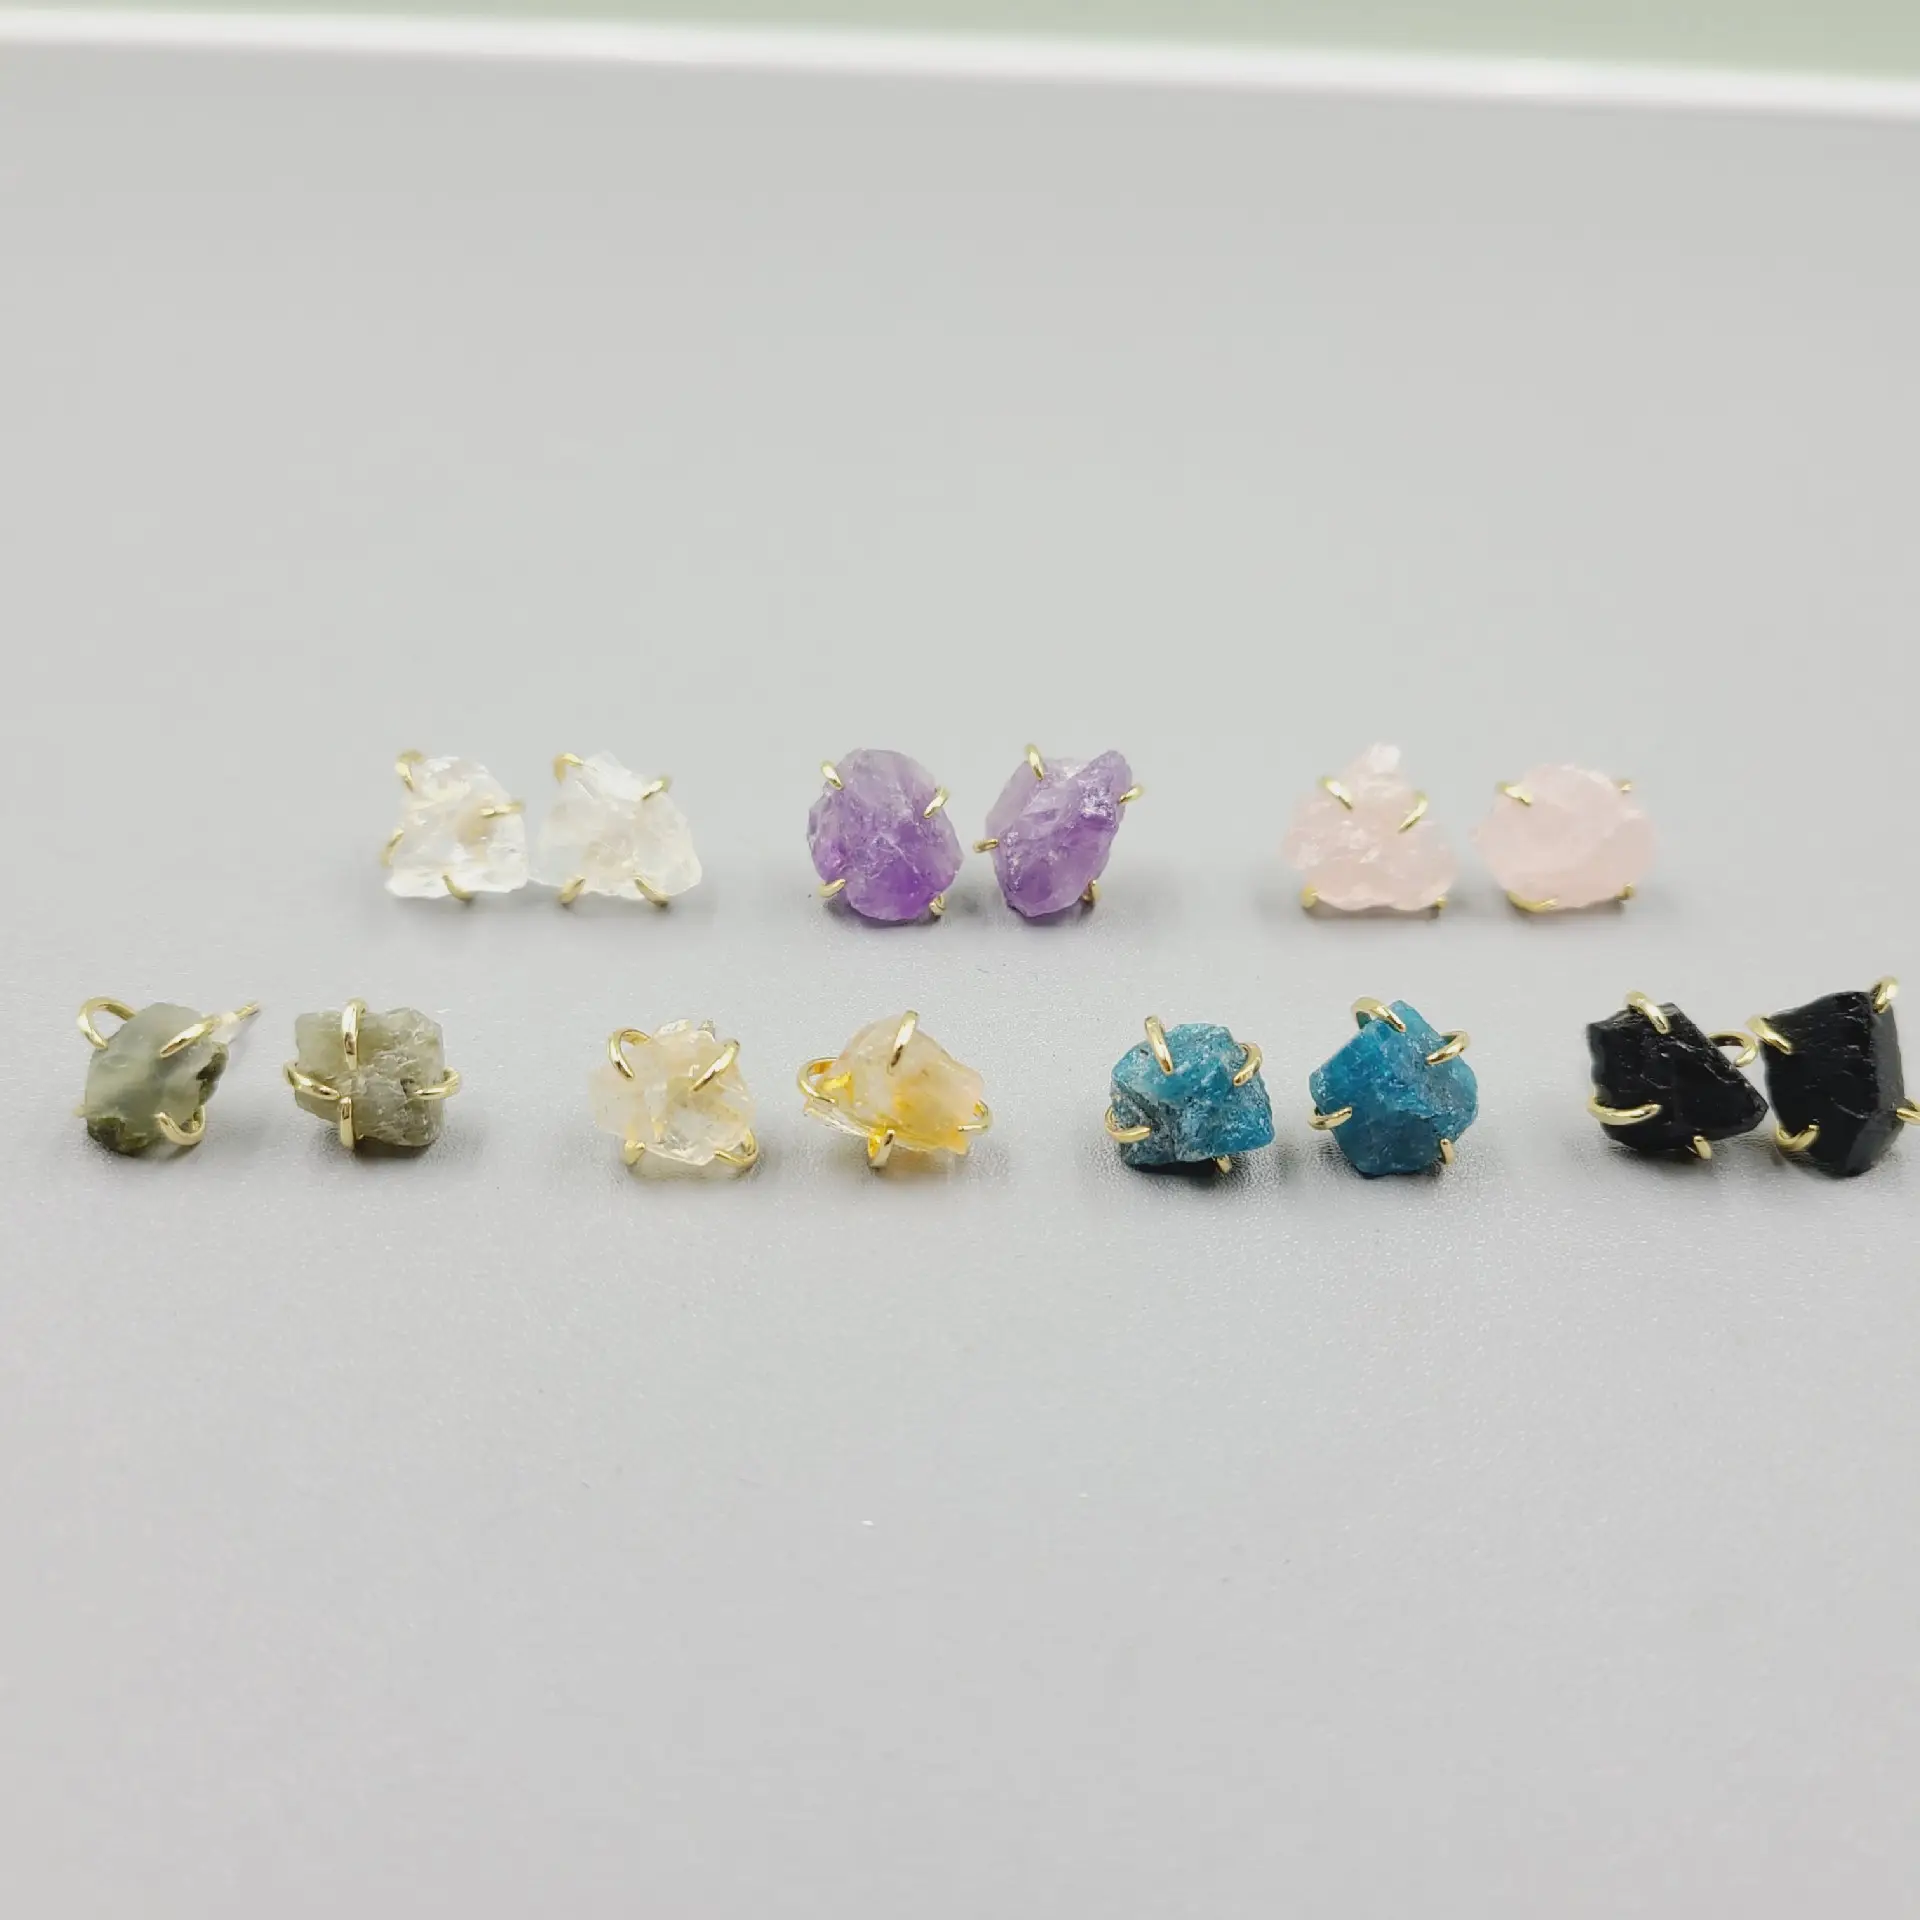 Stainless Steel Four Claws Colorful Natural Rough Irregular Original Crystal Quartz Stone Gemstone Studs Earrings for Women